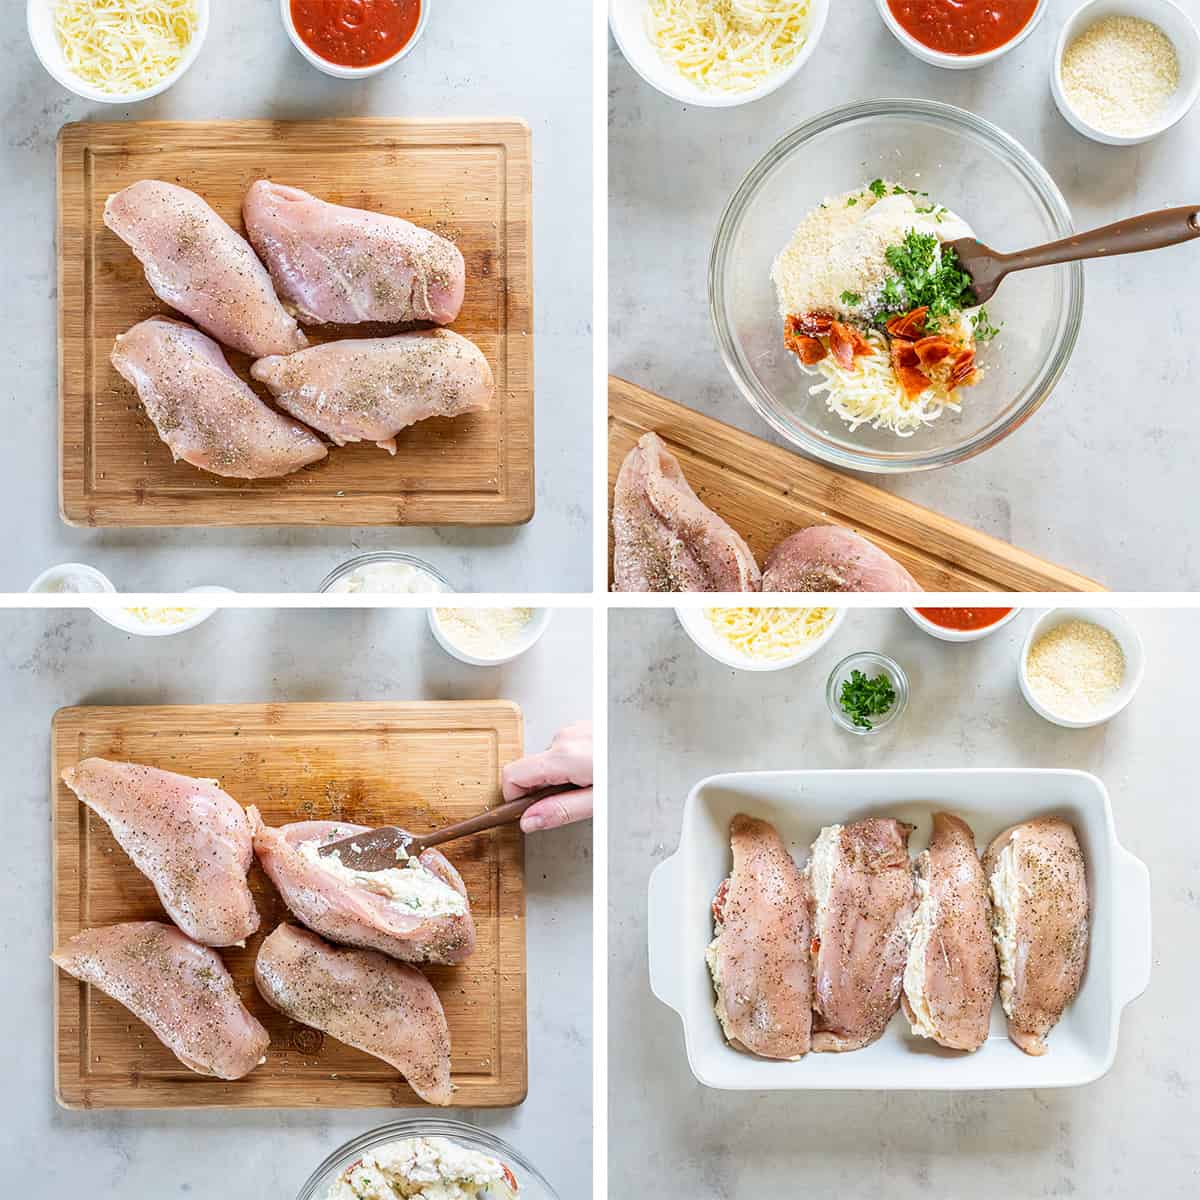 Four images of a ricotta mixture in a bowl, stuffed inside chicken breasts, and the chicken in a baking pan.